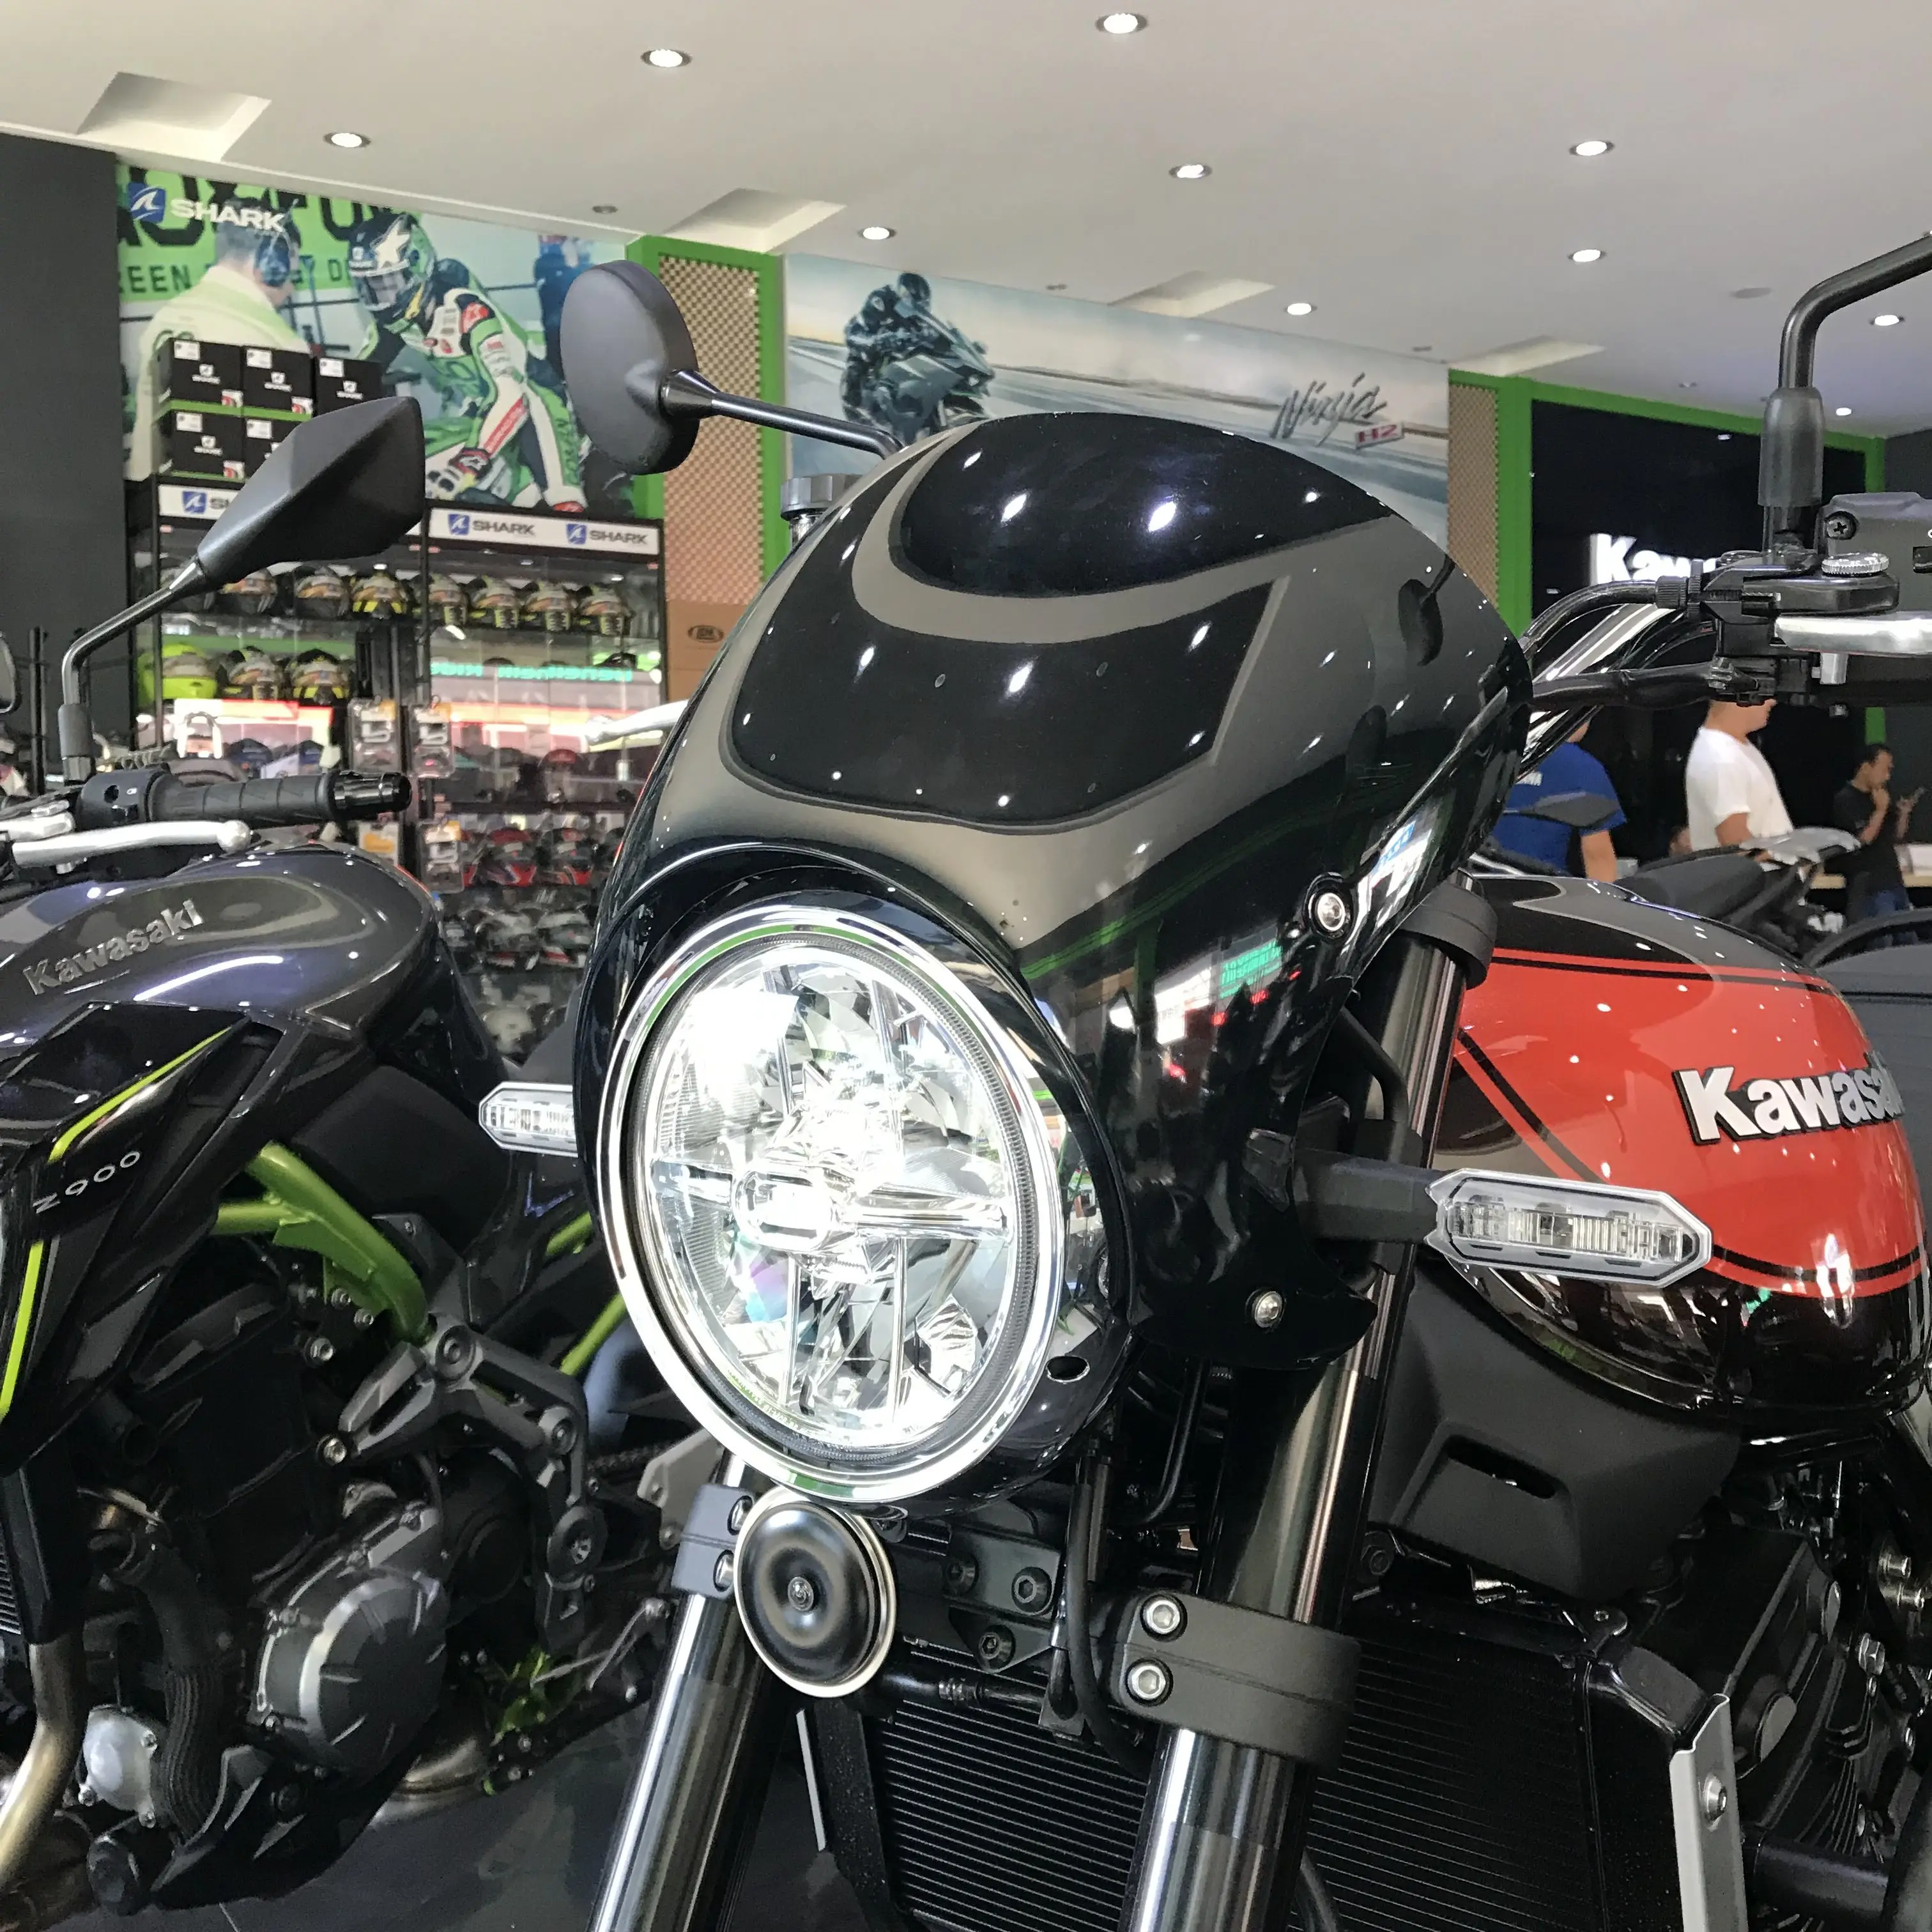 Z 900RSフロントガラスフェアリング風偏向器カワサキZ900RSカフェレーサー2018 2019 2020 2021 2022 z 900 rs米国  - AliExpress Automobiles  Motorcycles